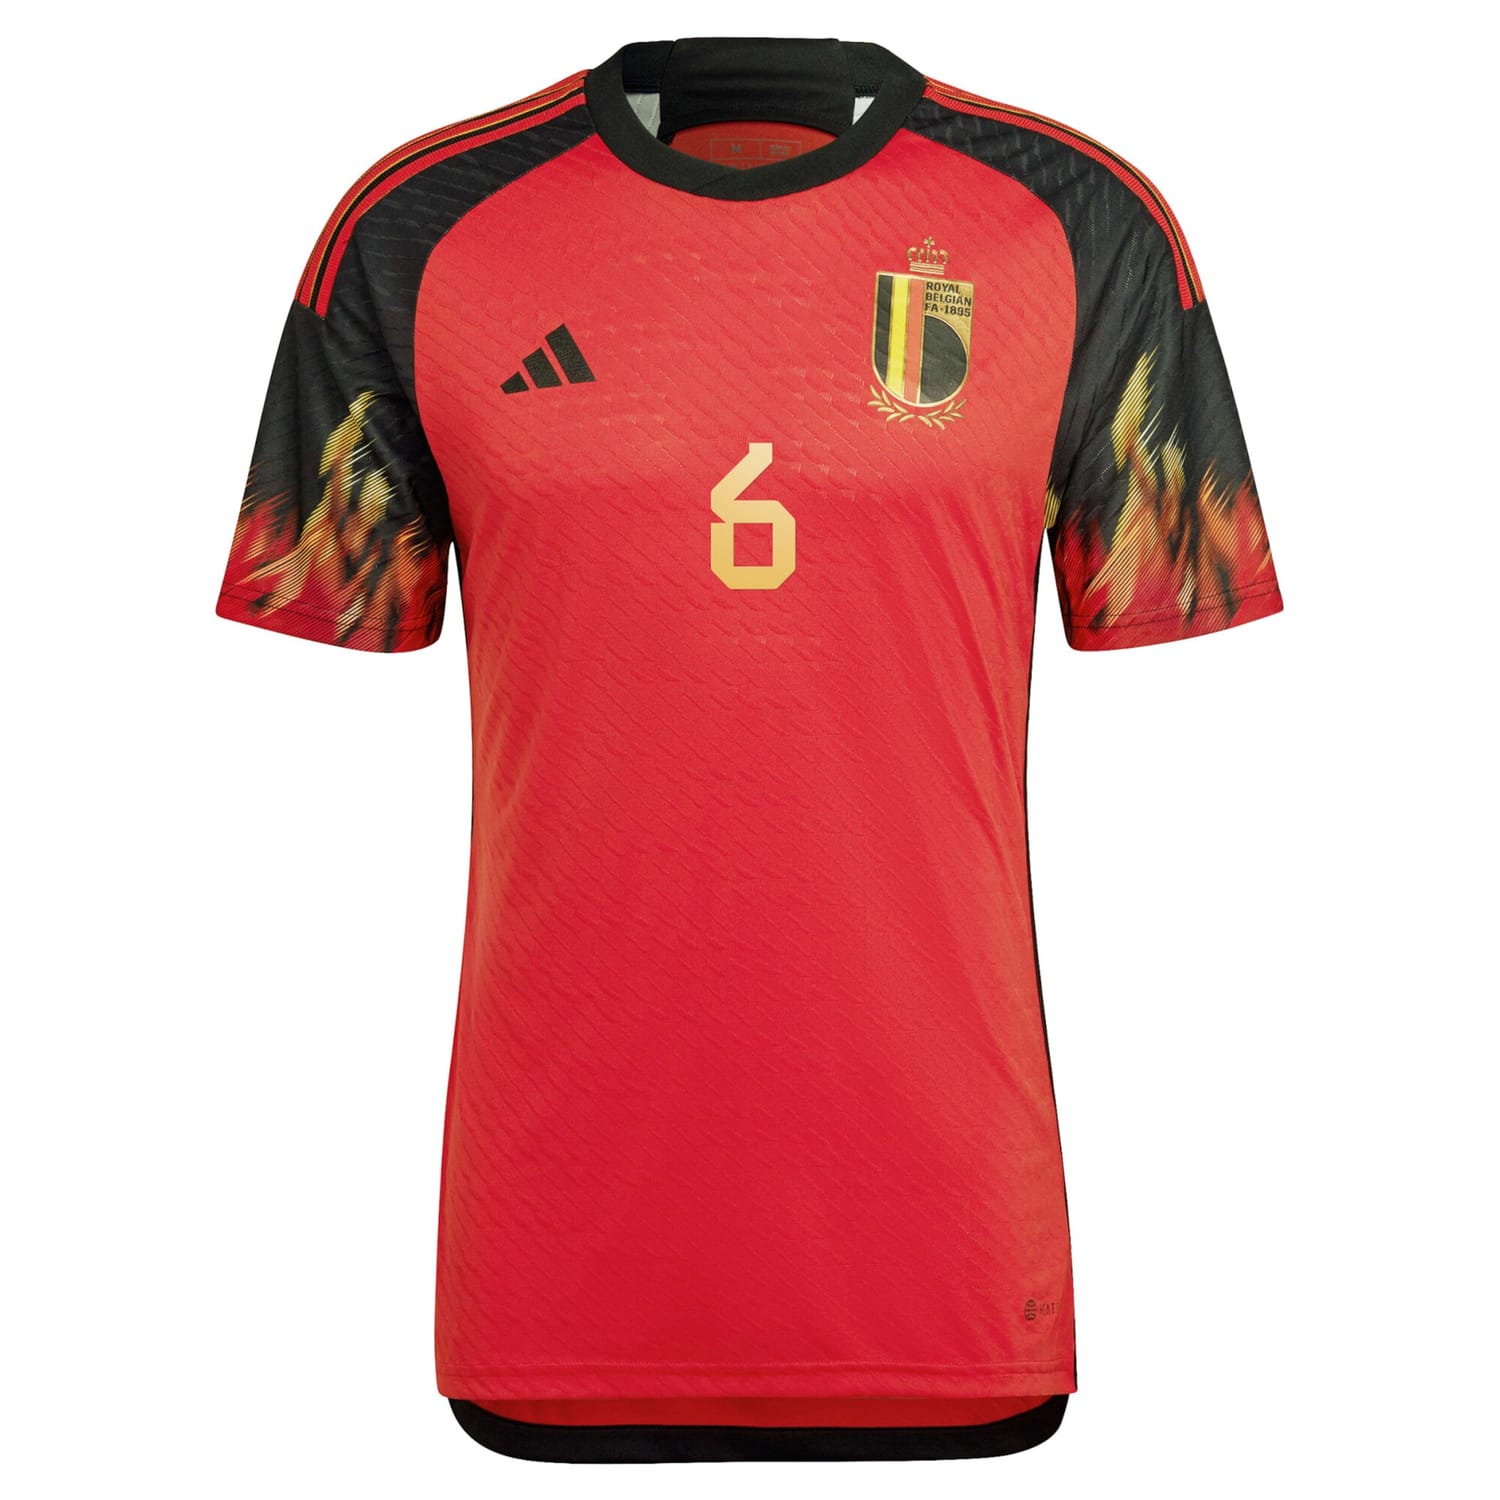 Belgium National Team Home Authentic Jersey Shirt 2022 player Axel Witsel 6 printing for Men